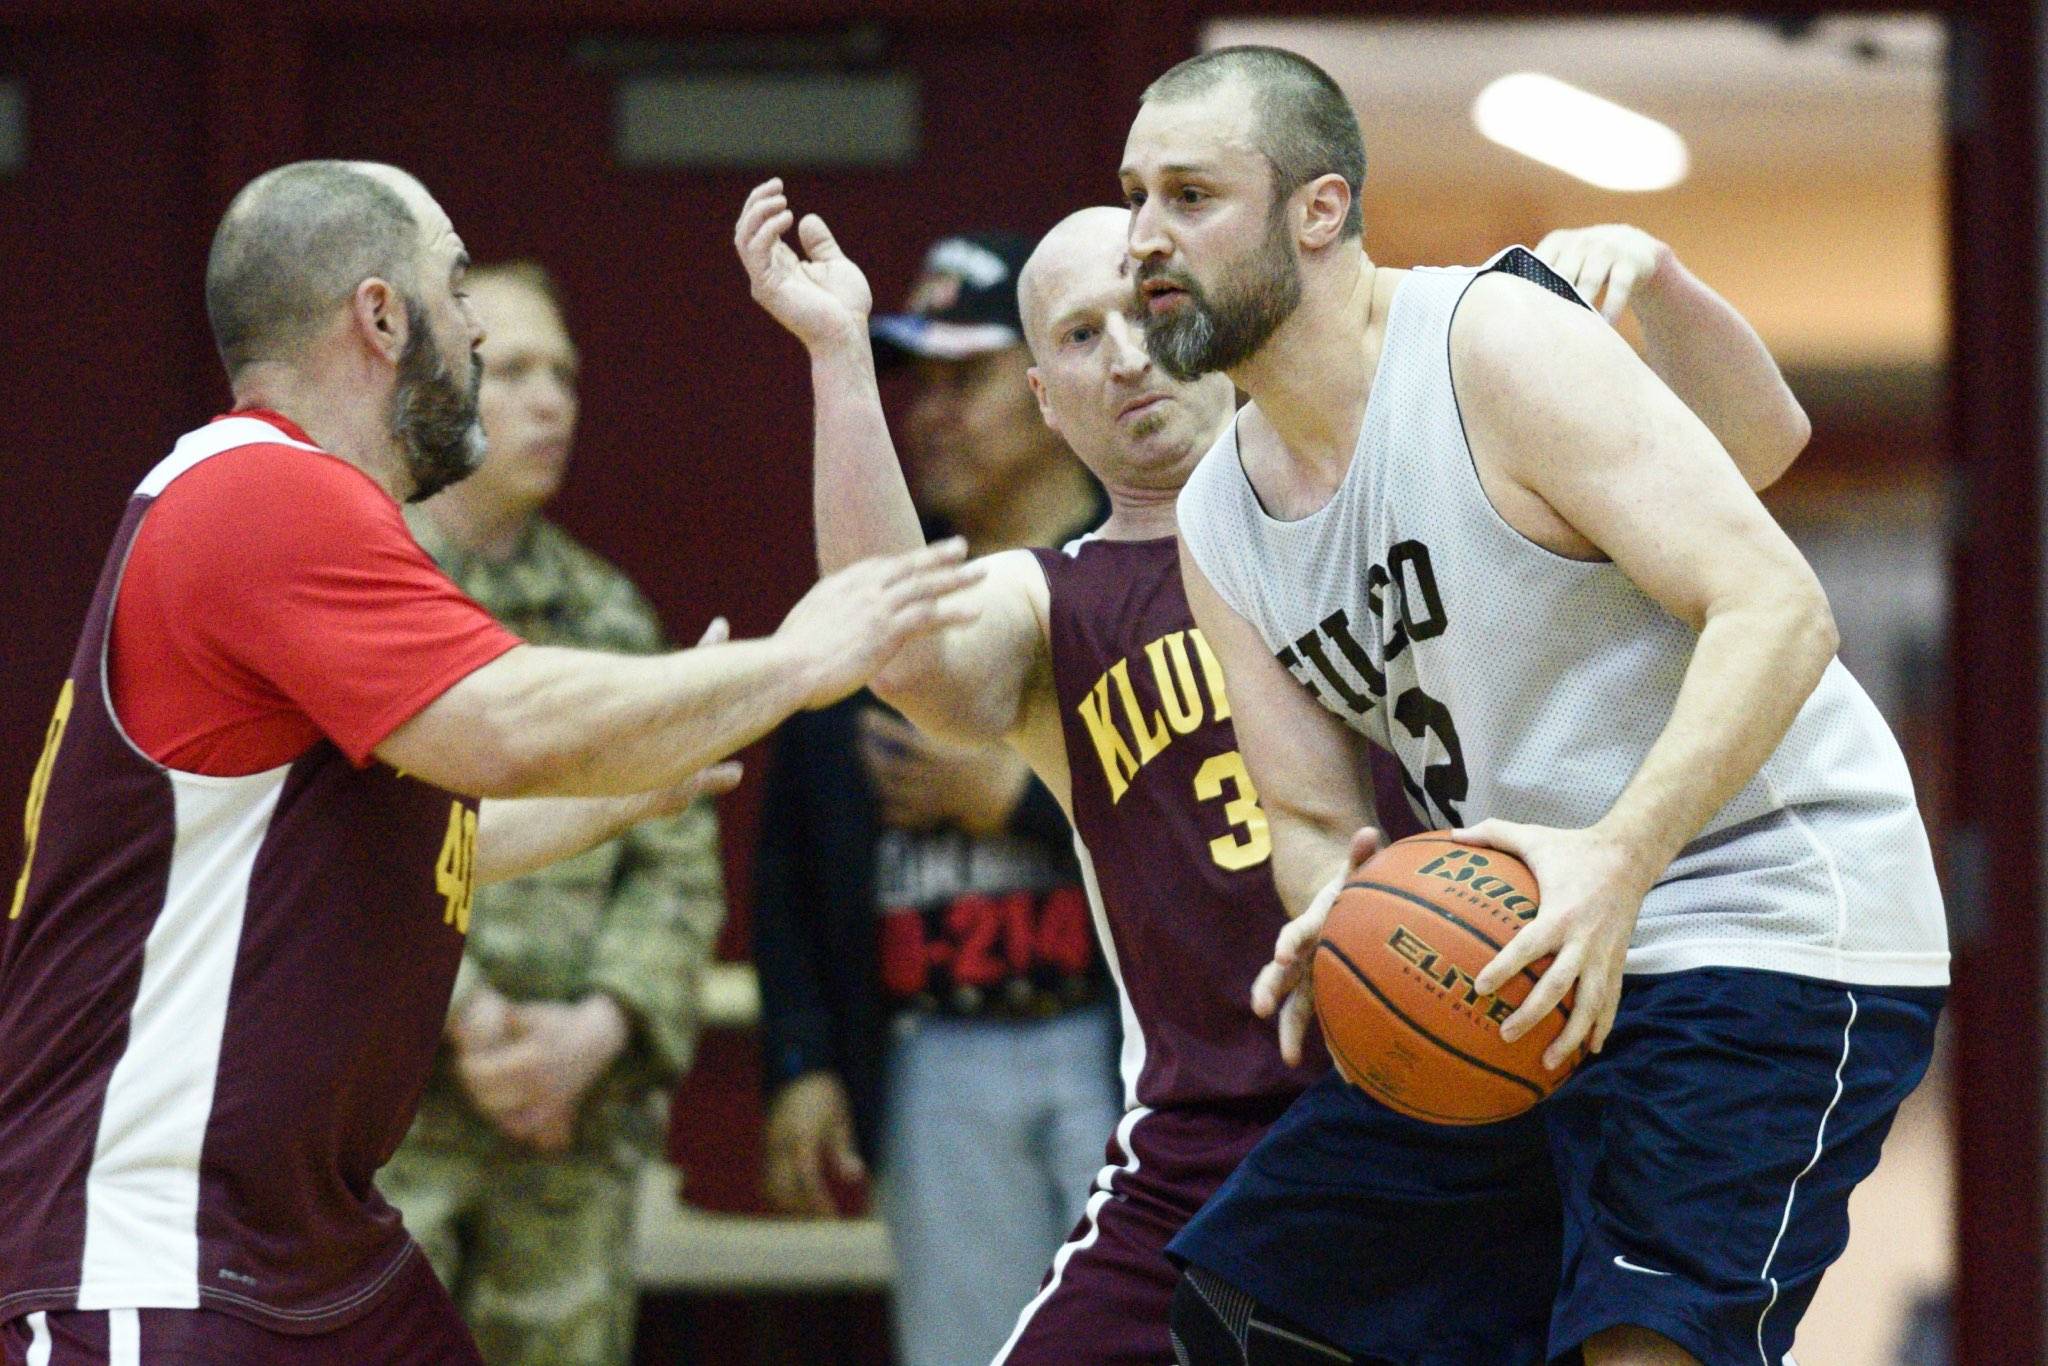 Filcom’s Ray Zimmer, right, is pressured under the basket by Klukwan’s Brian Friske, center, and Stuart DeWitt in their C bracket game at the Lions Club’s Gold Medal Basketball Tournament on Thursday, March 21, 2019.